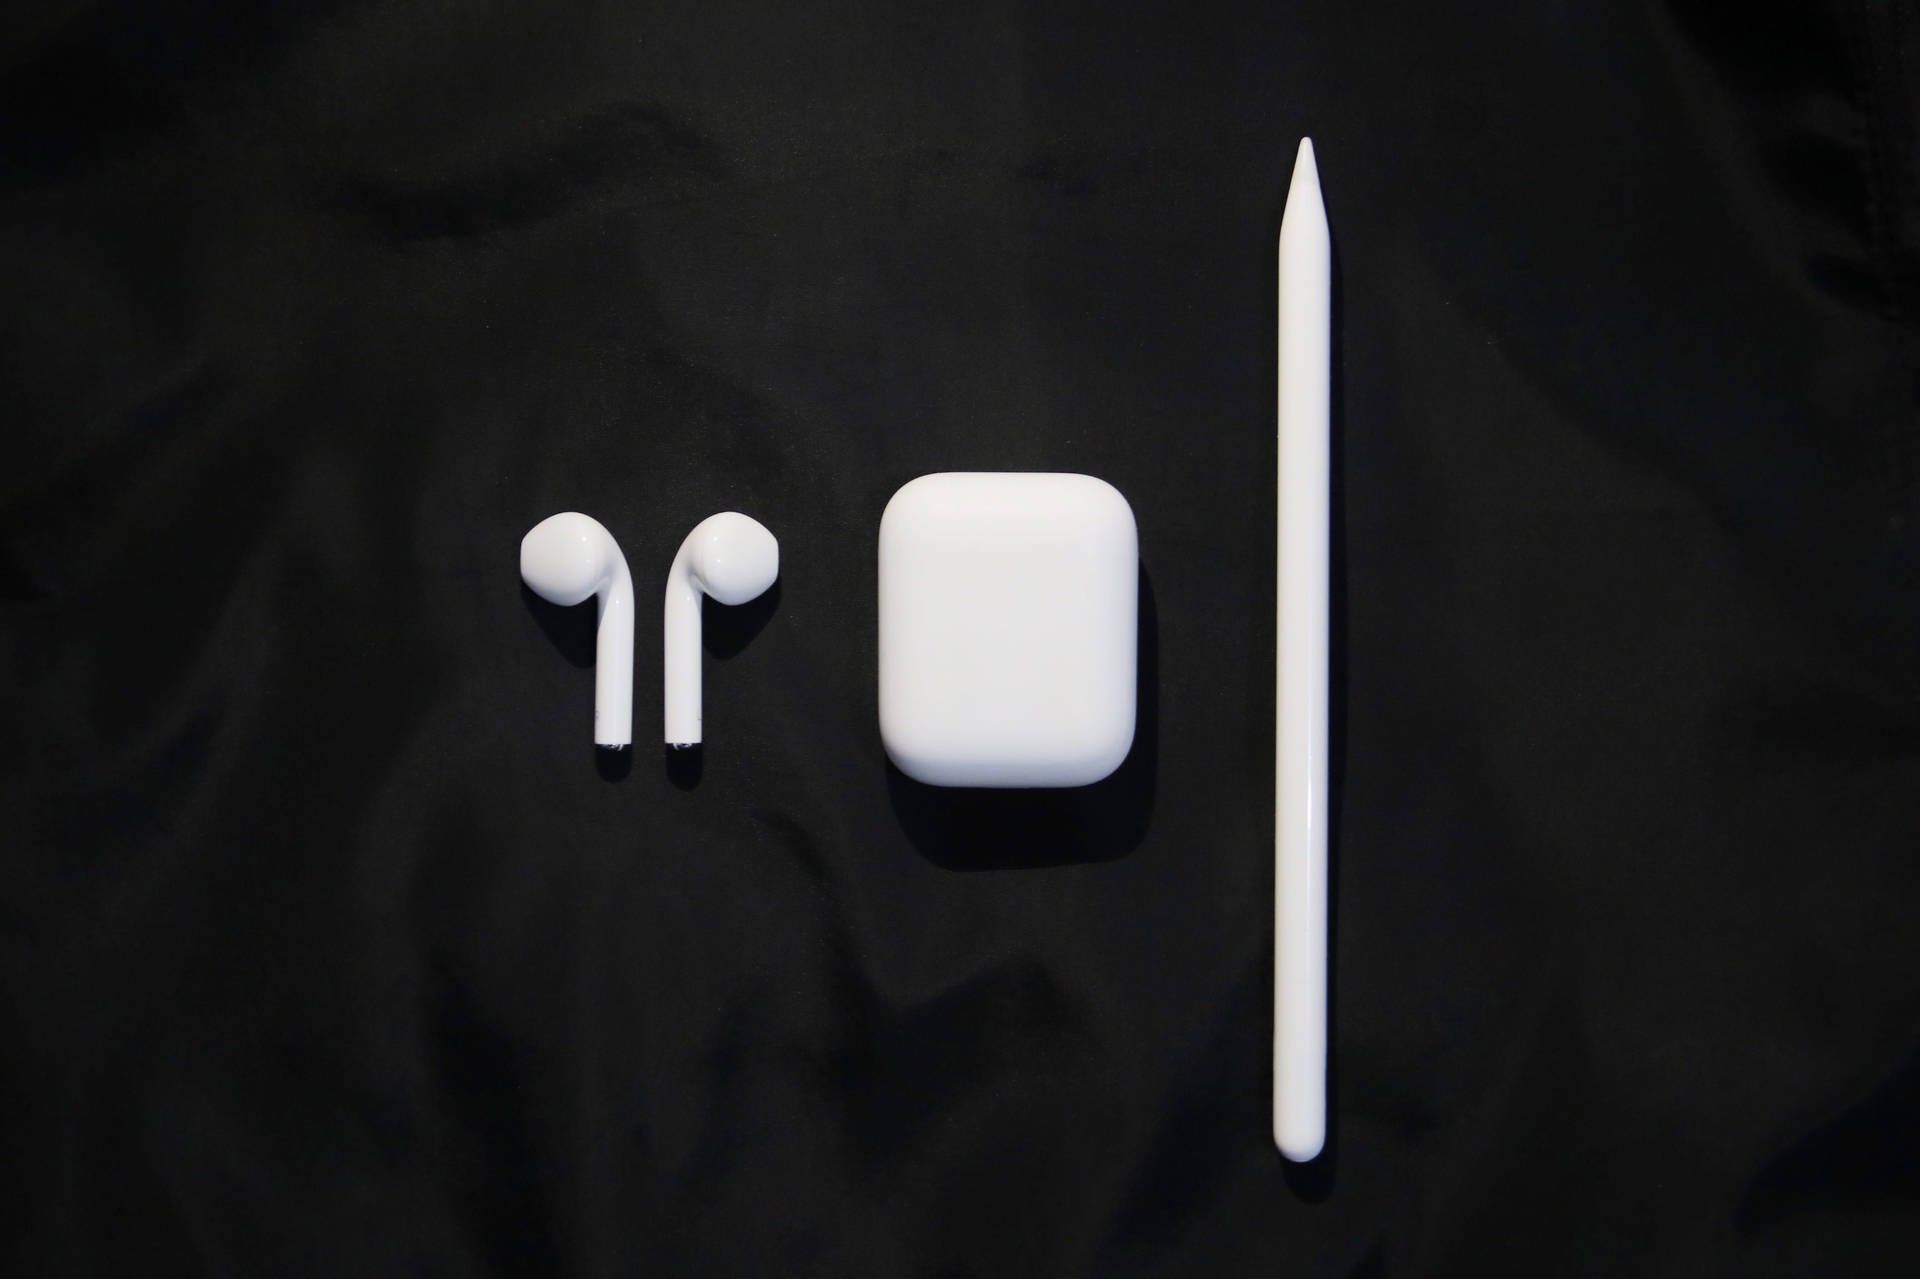 Stylish White Airpods With Accessories